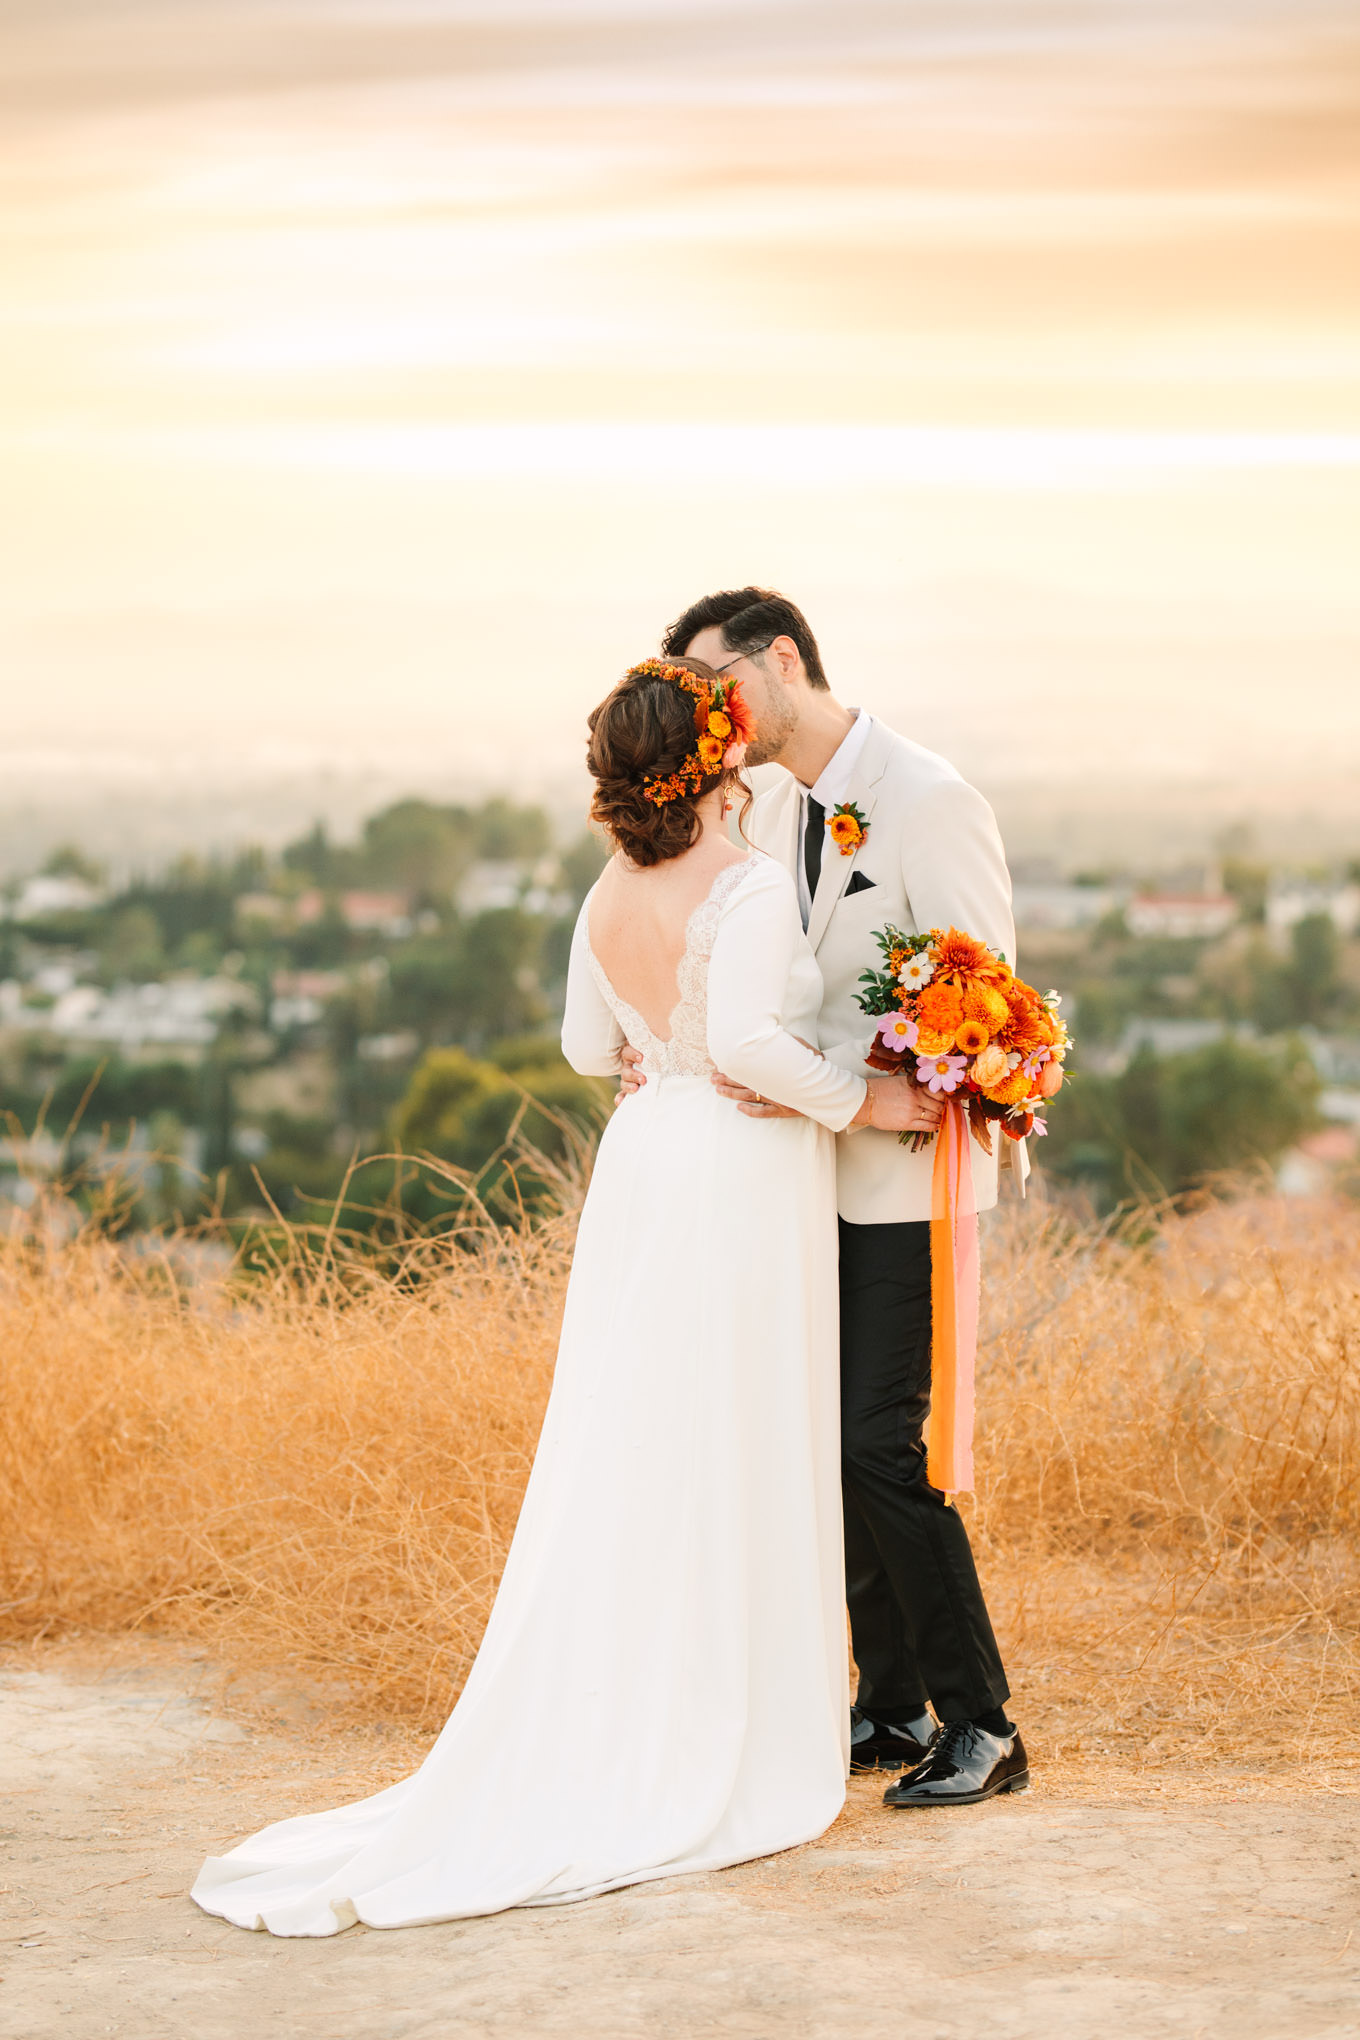 Bride and groom with cityscape backdrop share a kiss | Vibrant backyard micro wedding featured on Green Wedding Shoes | Colorful LA wedding photography | #losangeleswedding #backyardwedding #microwedding #laweddingphotographer Source: Mary Costa Photography | Los Angeles